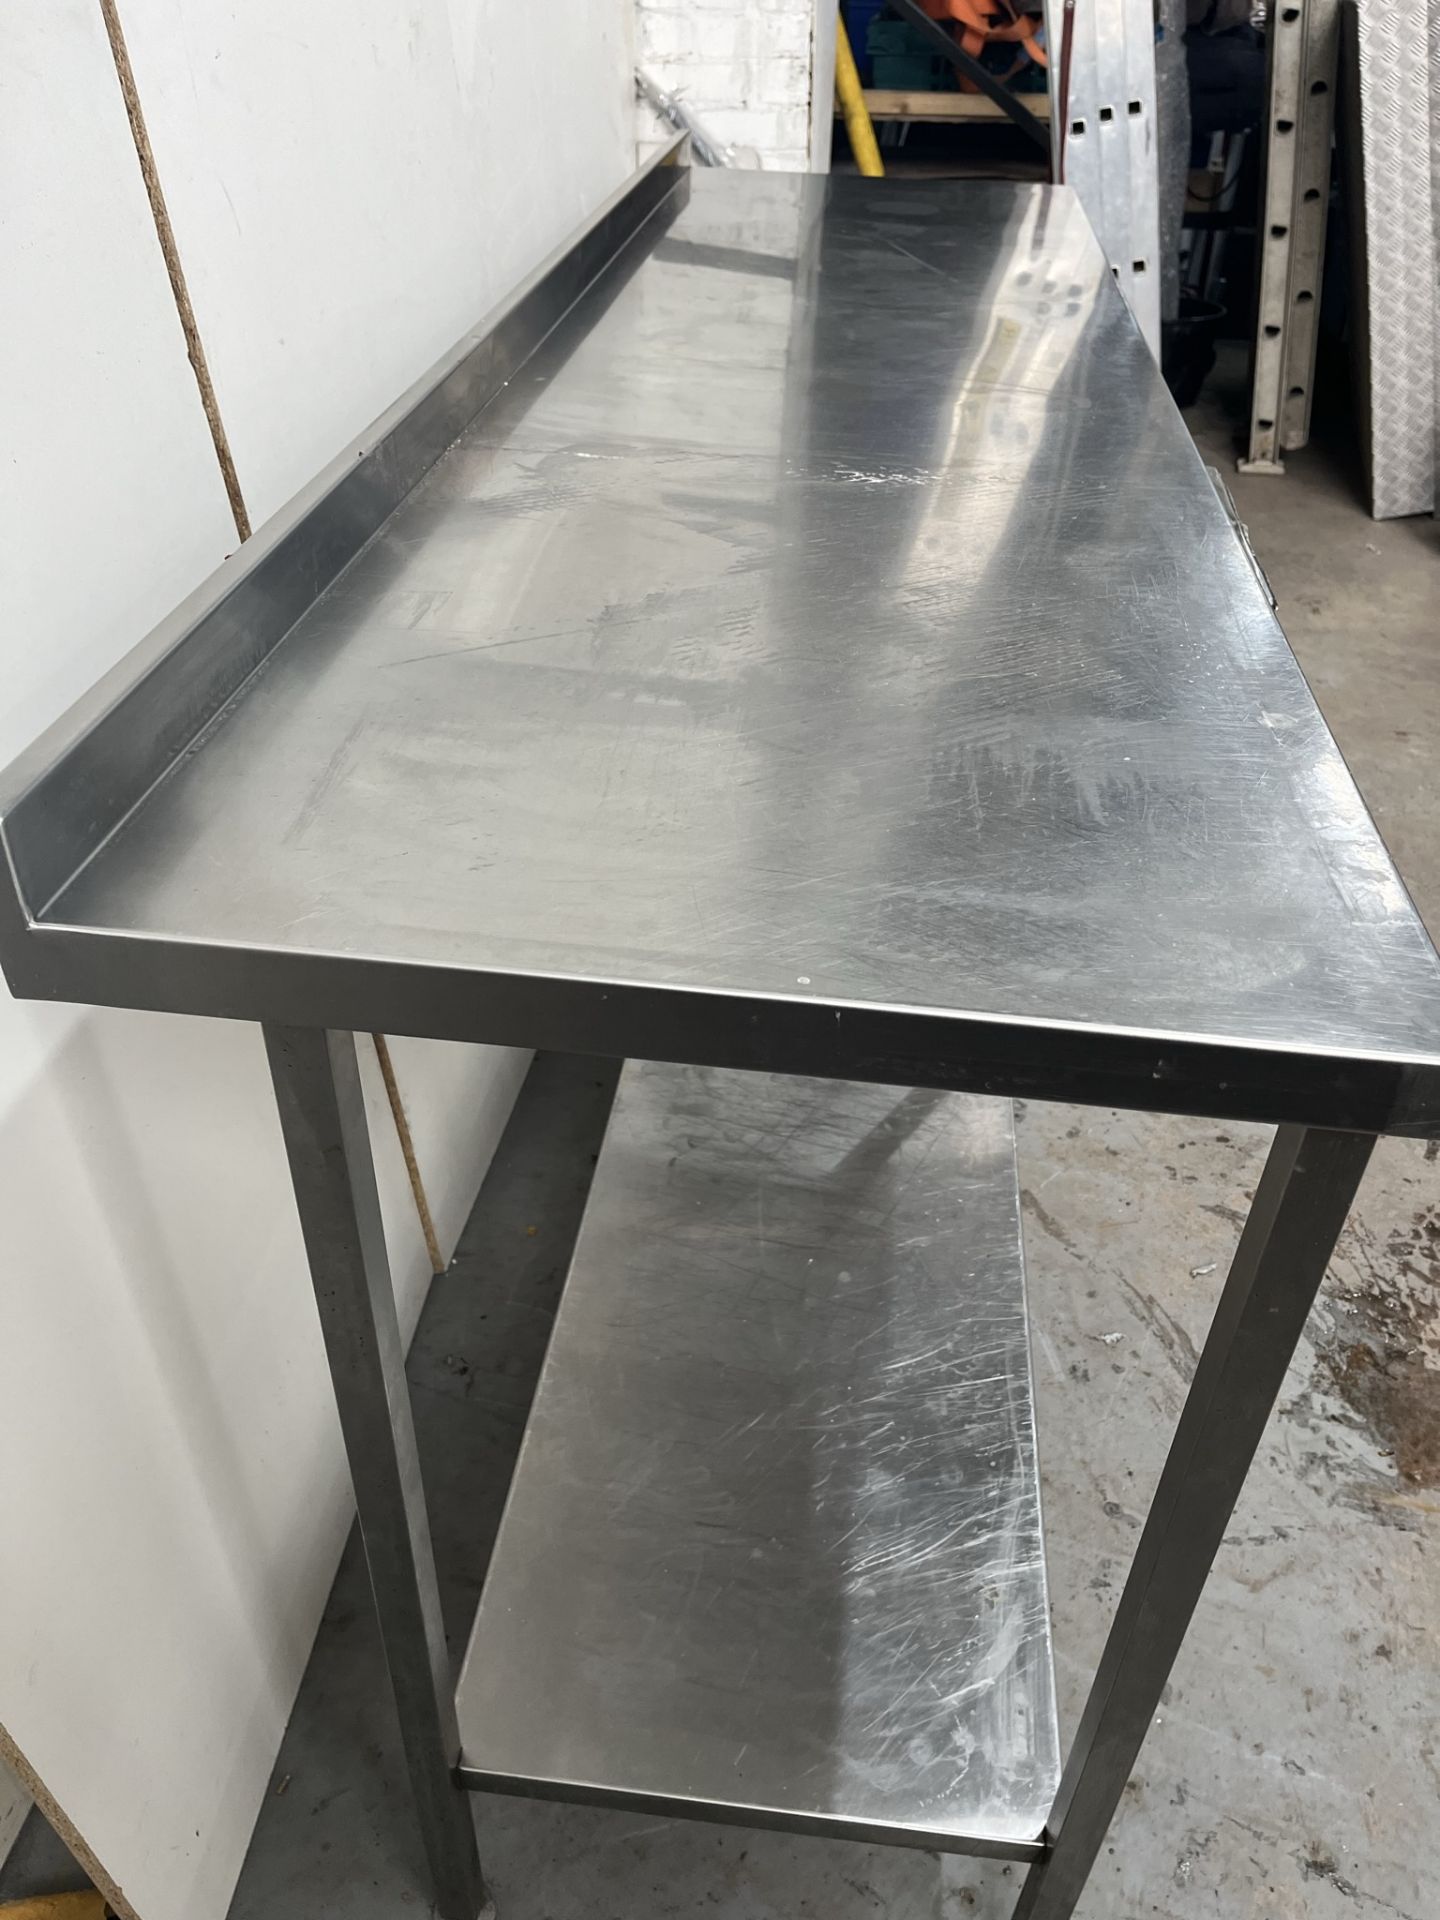 Commercial Stainless Steel Catering Table With Bottom Shelf & Trays - Image 11 of 14